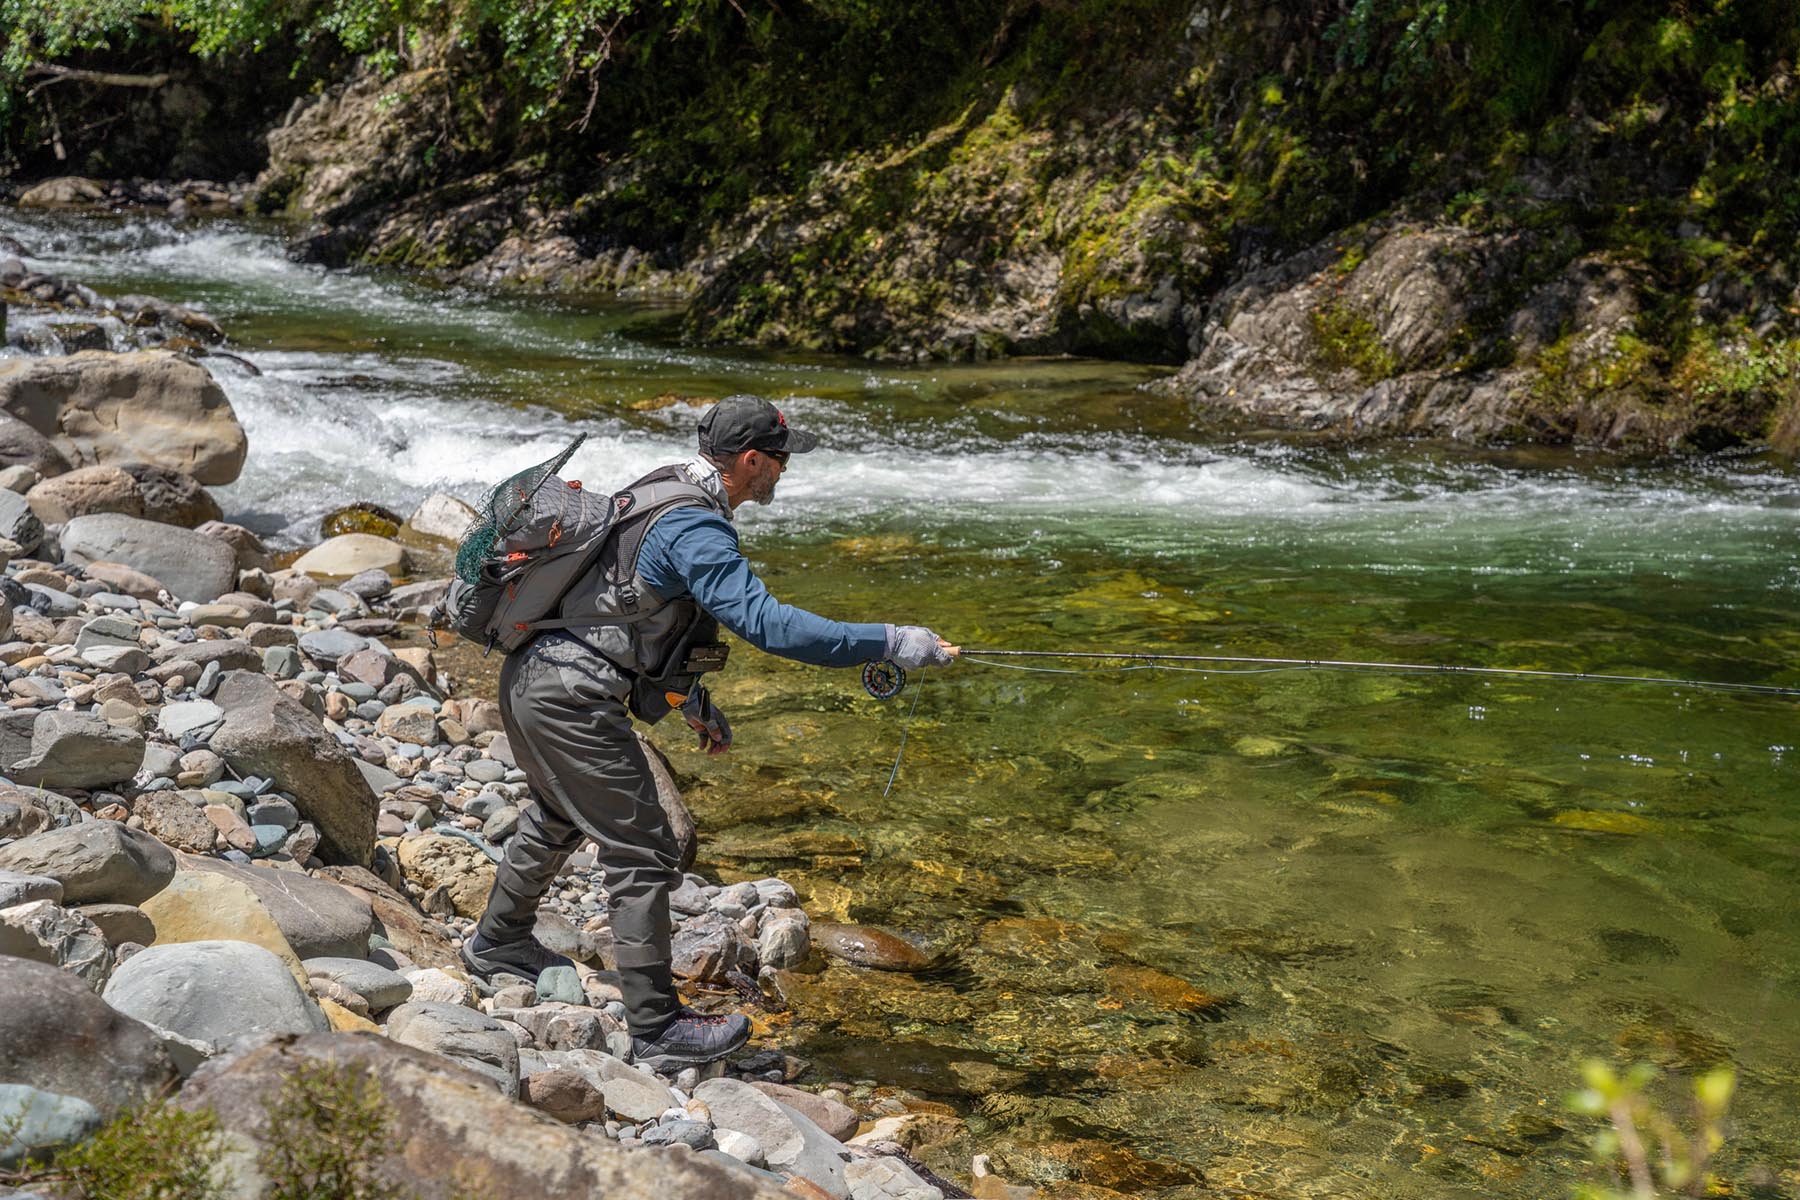 The New 2022 Simms G3 Guide Waders Put To The Test – Manic Tackle